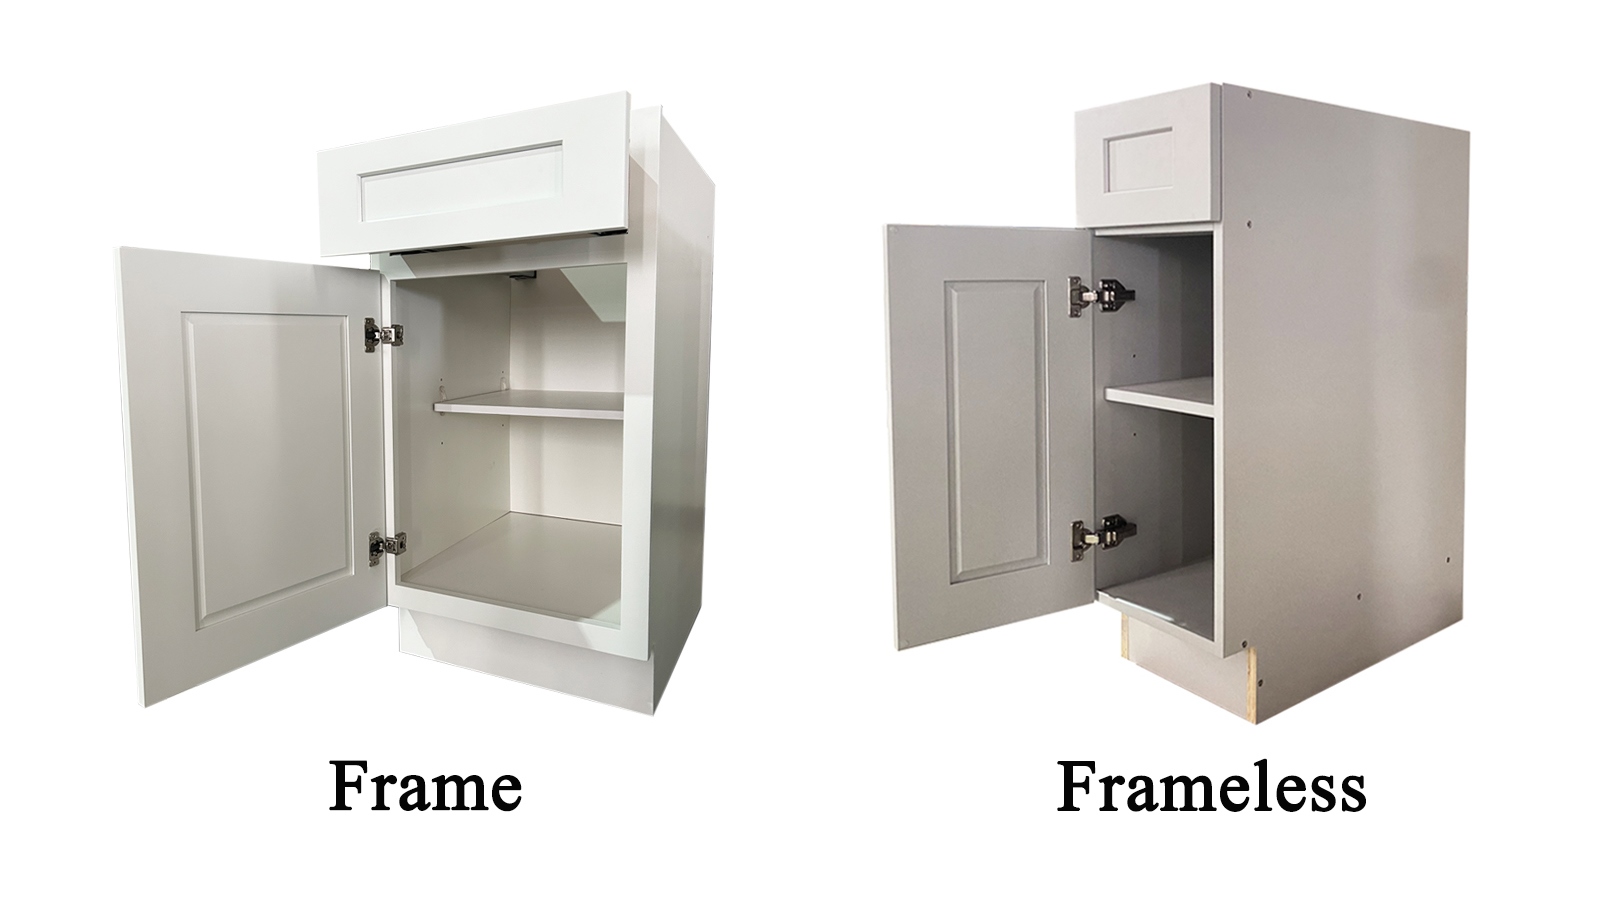 What Is The Difference Between Framed Cabinets And Frameless Cabinets?